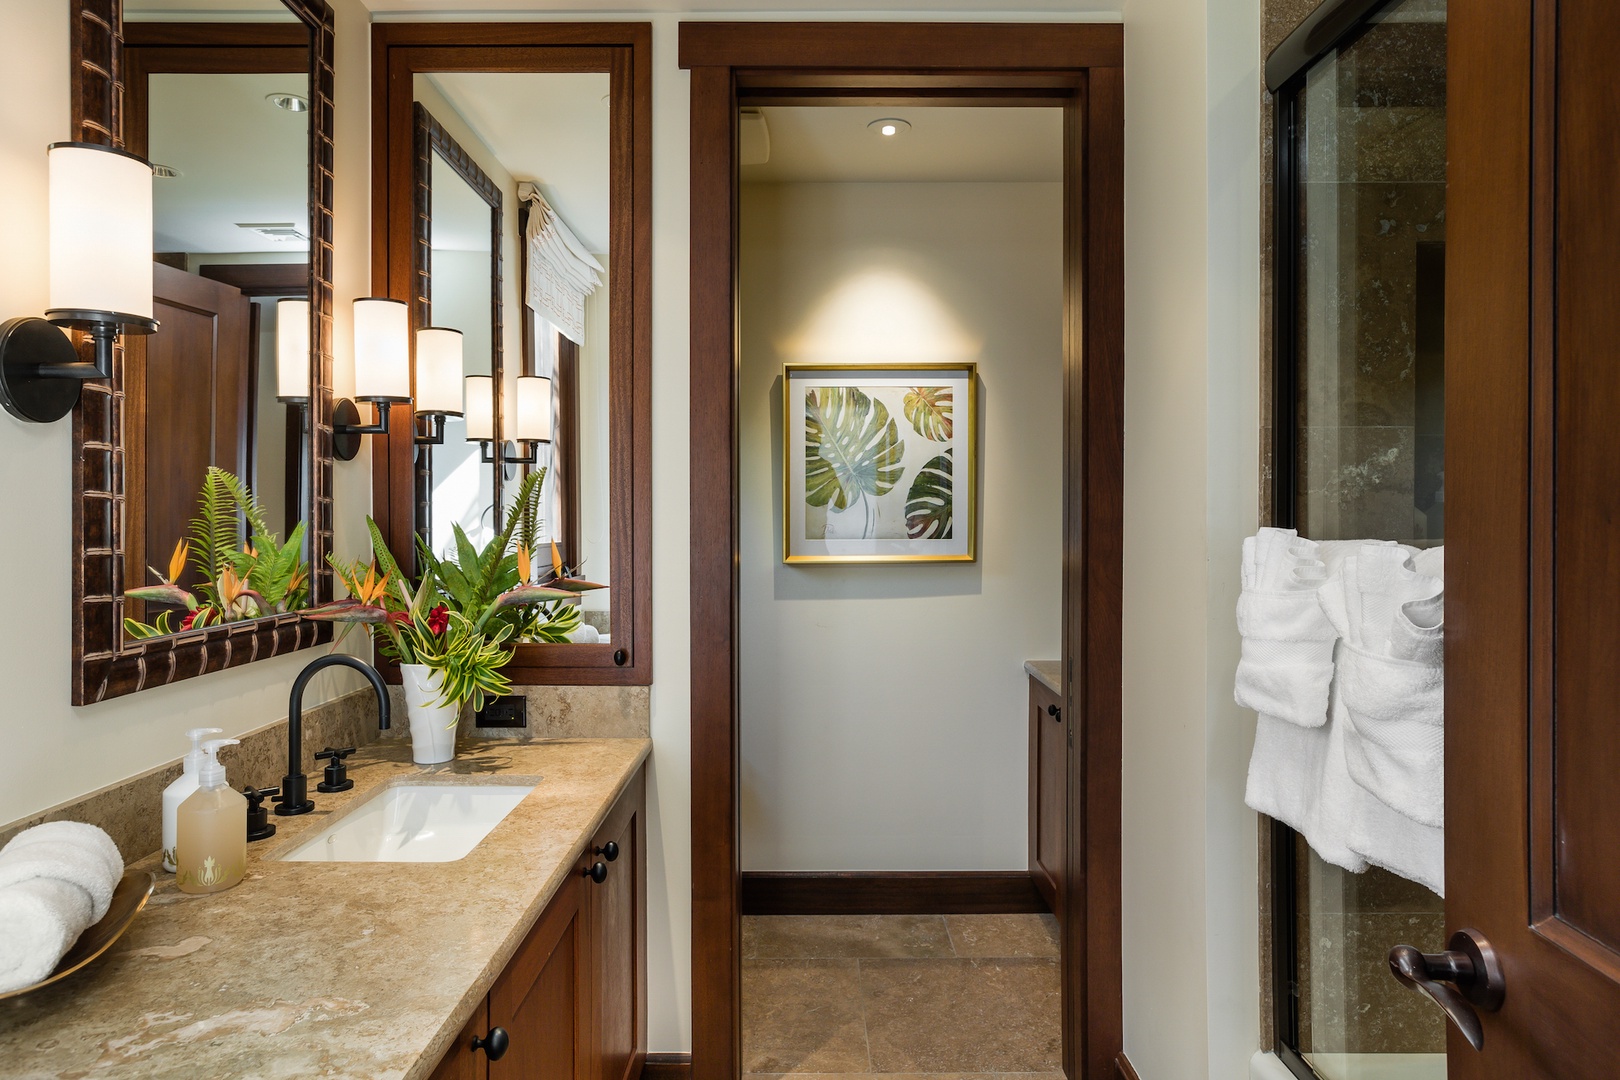 Kailua Kona Vacation Rentals, 2BD Hali'ipua Villa (108) at Four Seasons Resort at Hualalai - Gorgeous ensuite bathroom for den with granite counter tops and shower with bathtub.